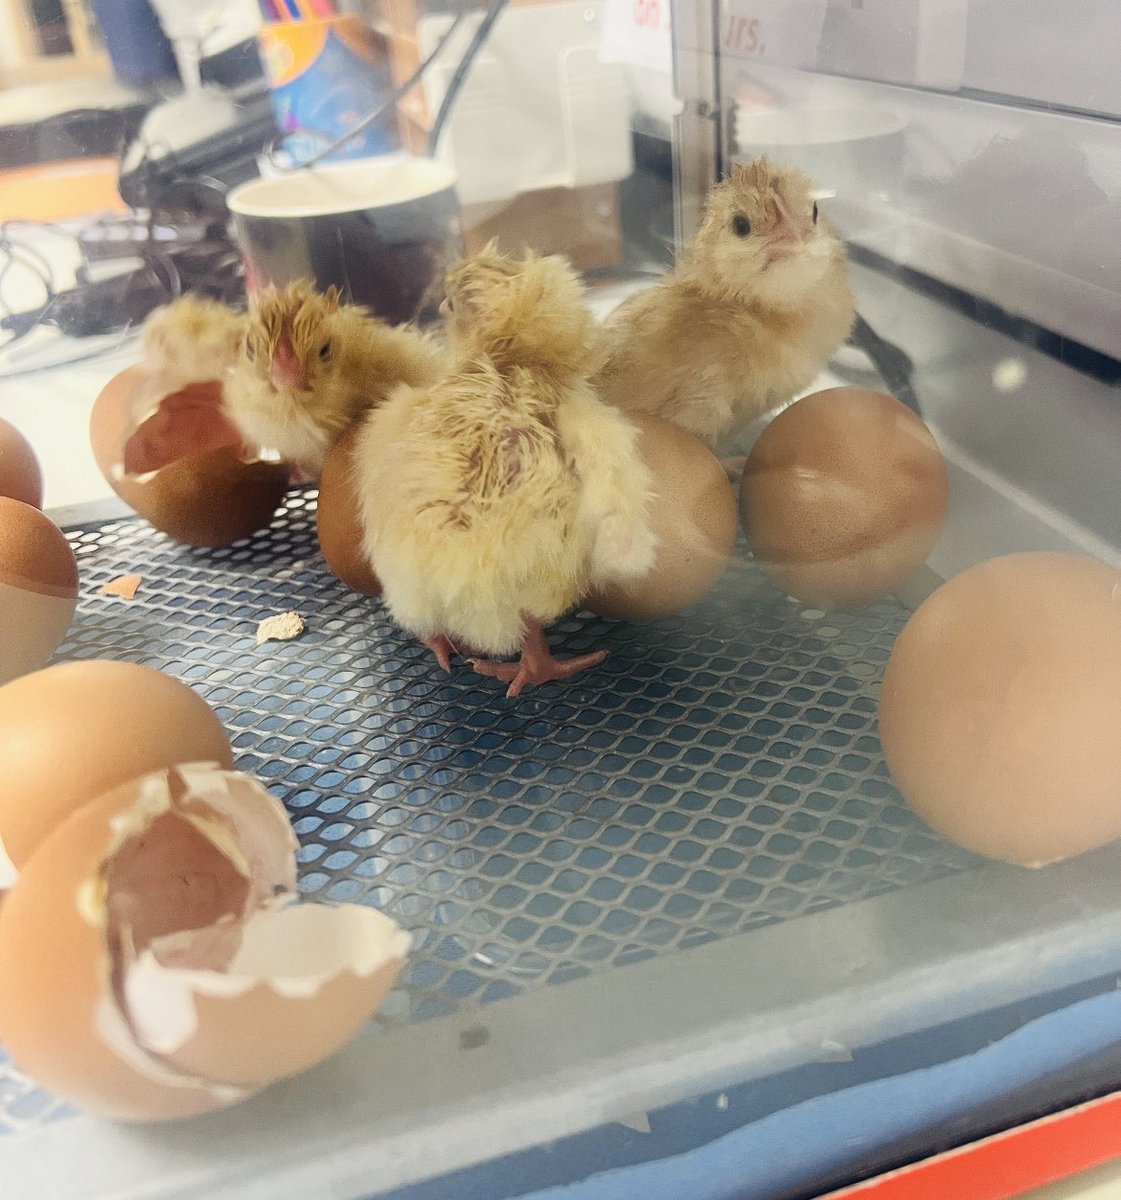 The first of our “Beacon Babies” were born overnight. Three little chicks waiting to be named when the students arrive this morning, with three more eggs about to crack. A busy morning on the delivery ward! @Livingeggs